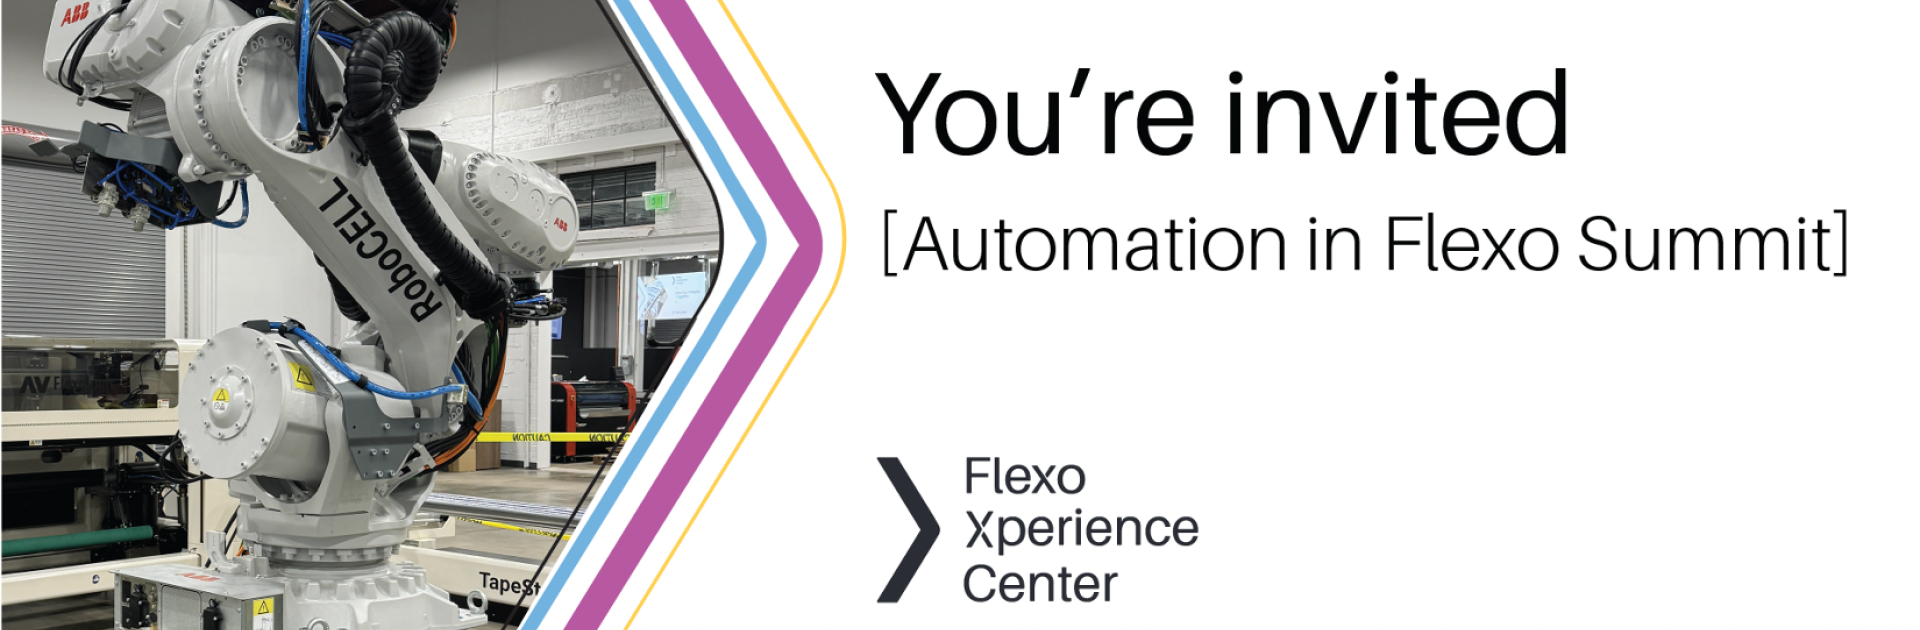 Automation in Flexo Summit - the FXC